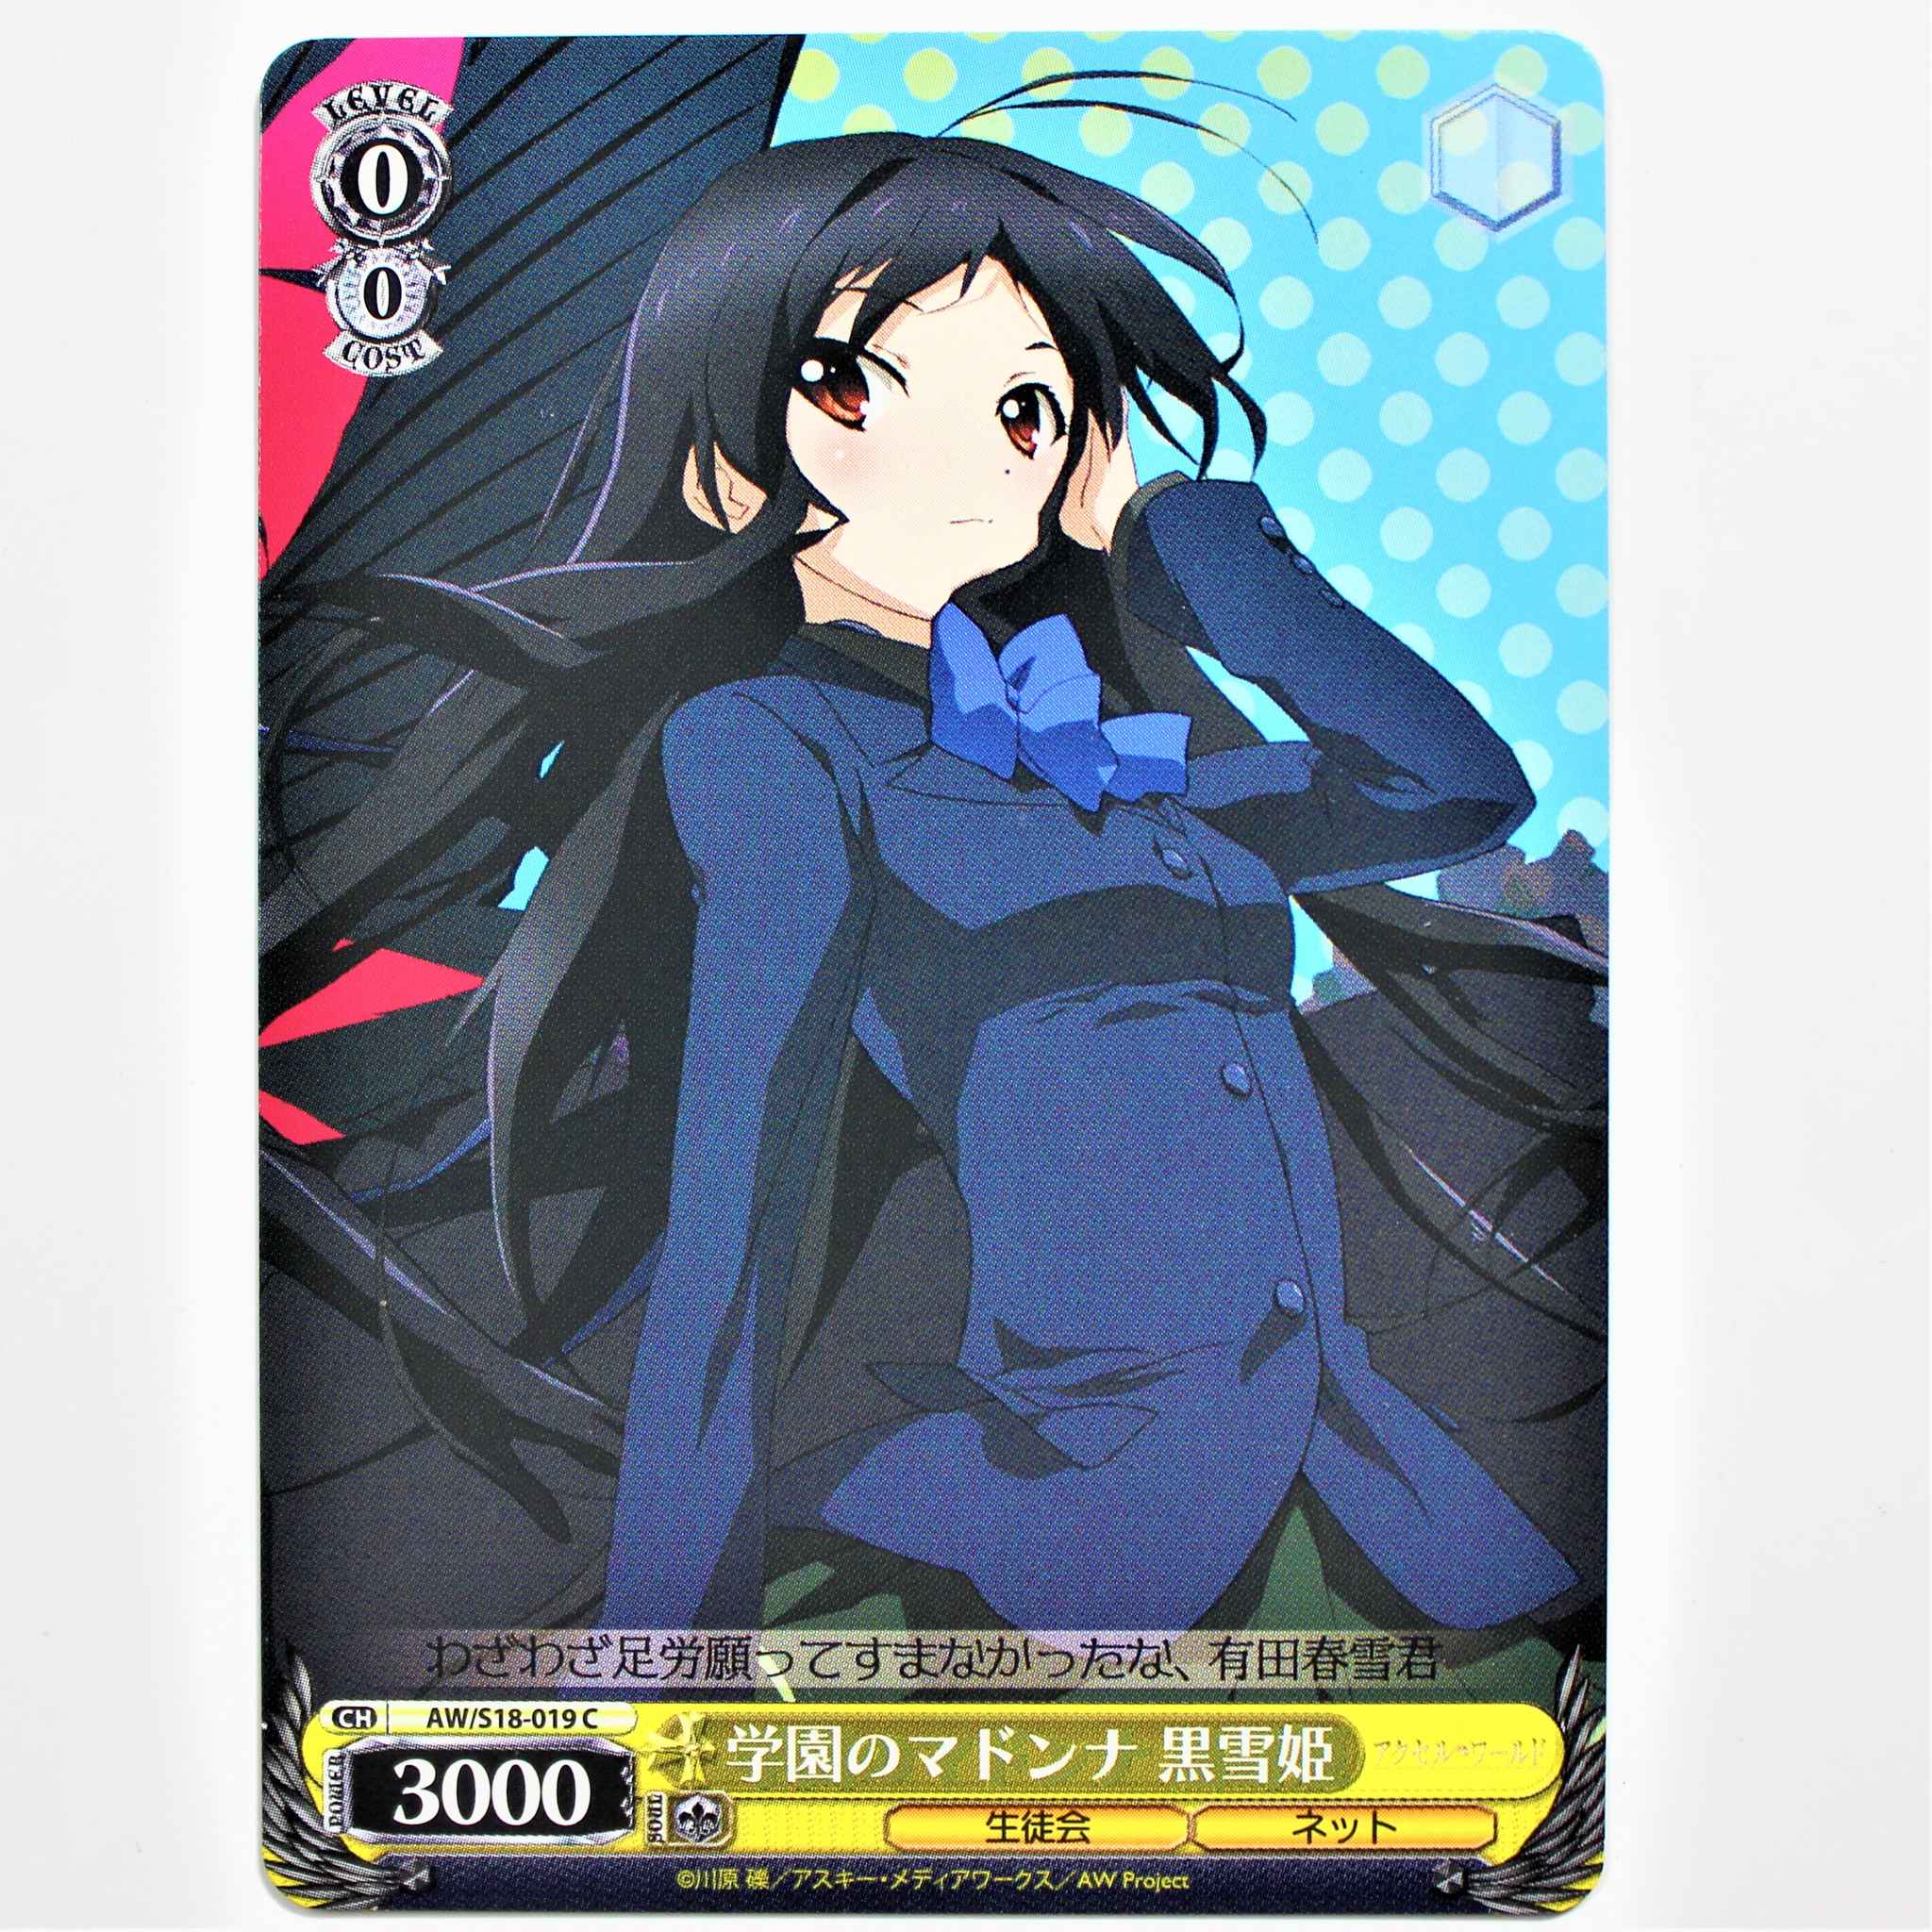 School Madonna Kuroyukihime Japanese Version School Madonna Kuroyukihime Accel World Weiss Schwarz Online Gaming Store For Cards Miniatures Singles Packs Booster Boxes